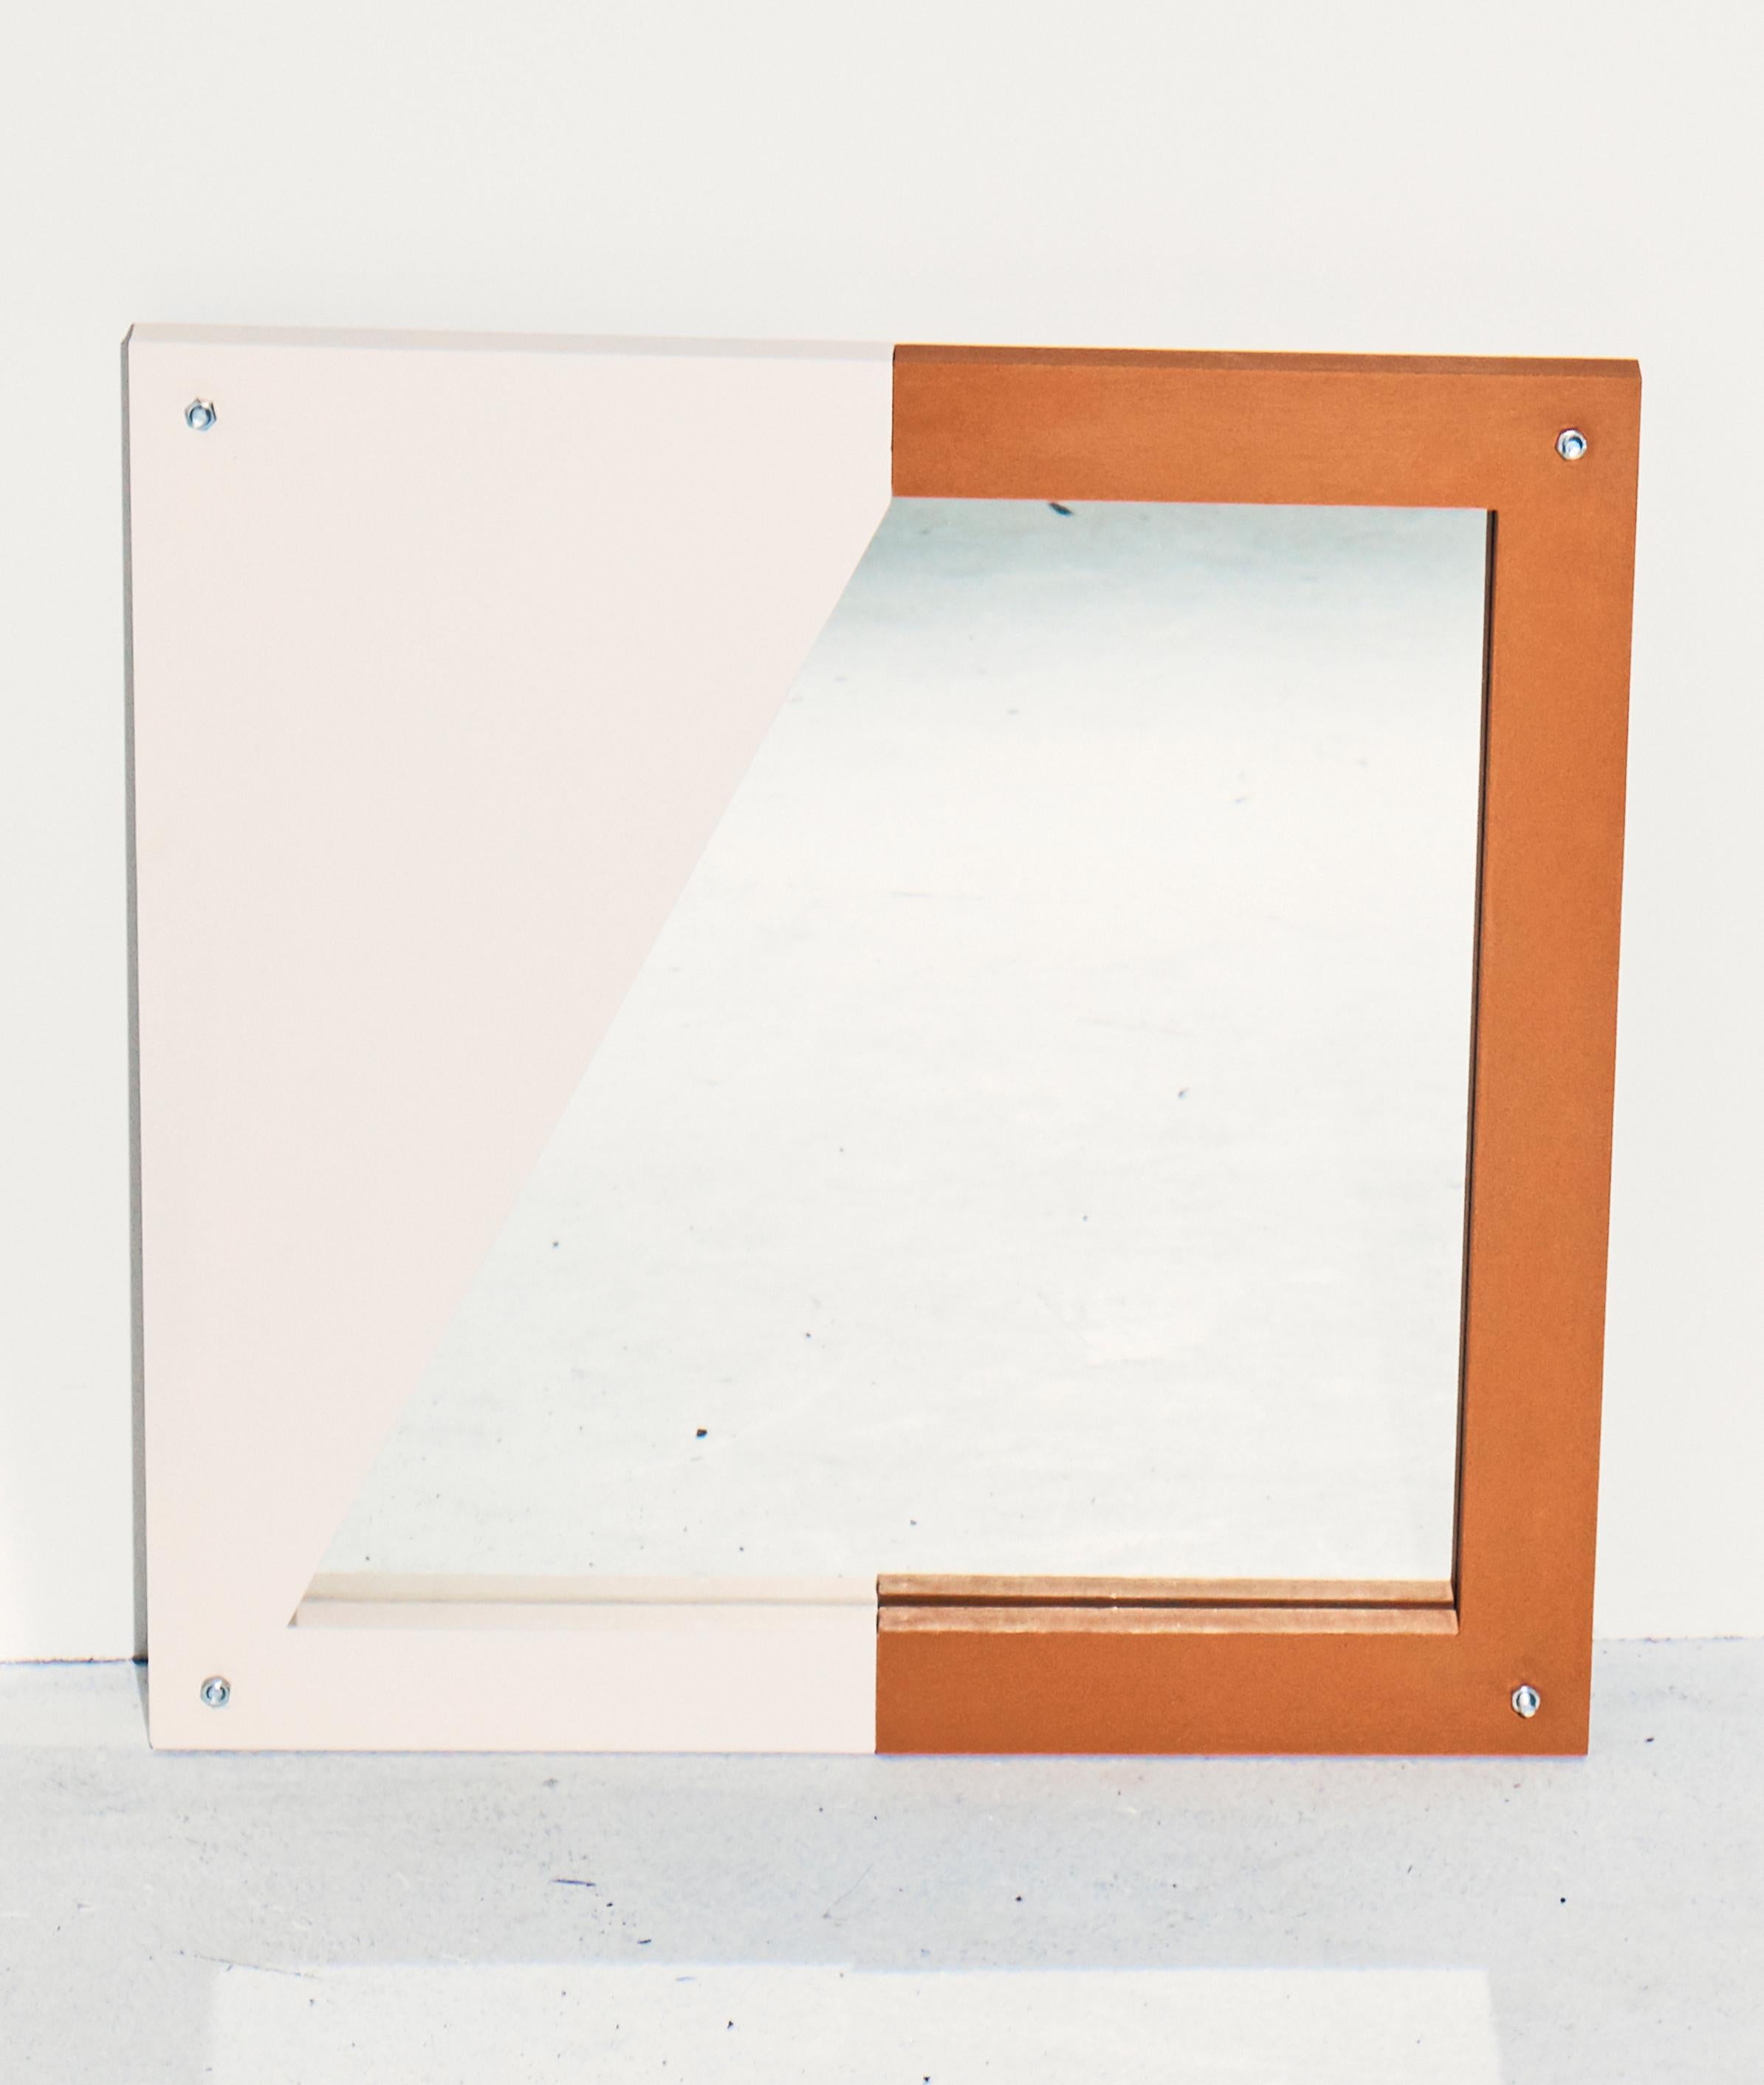 Mould mirror I by Theodora Alfredsdottir
Unique piece
Materials: MDF
Dimensions: 40 x 40 x 3 cm

Theodora Alfredsdottir is a product design studio based in London. 
Theodora is an Icelandic product designer. She holds a bachelor’s degree in